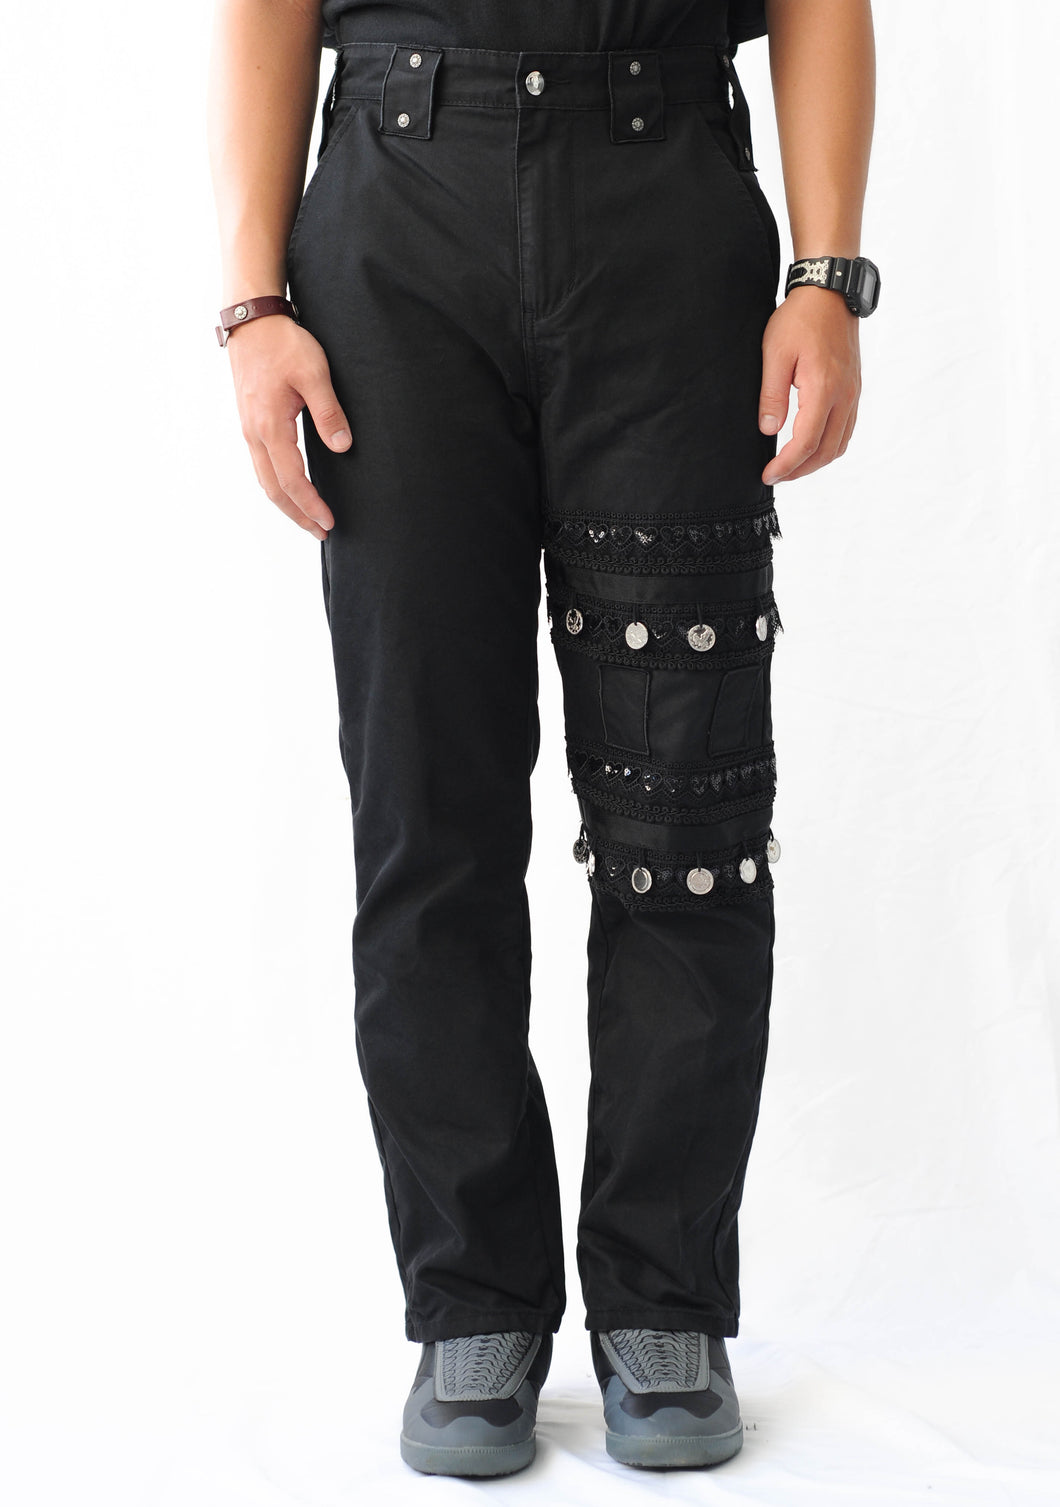 Youths in Balaclava Coin Trousers (Black)